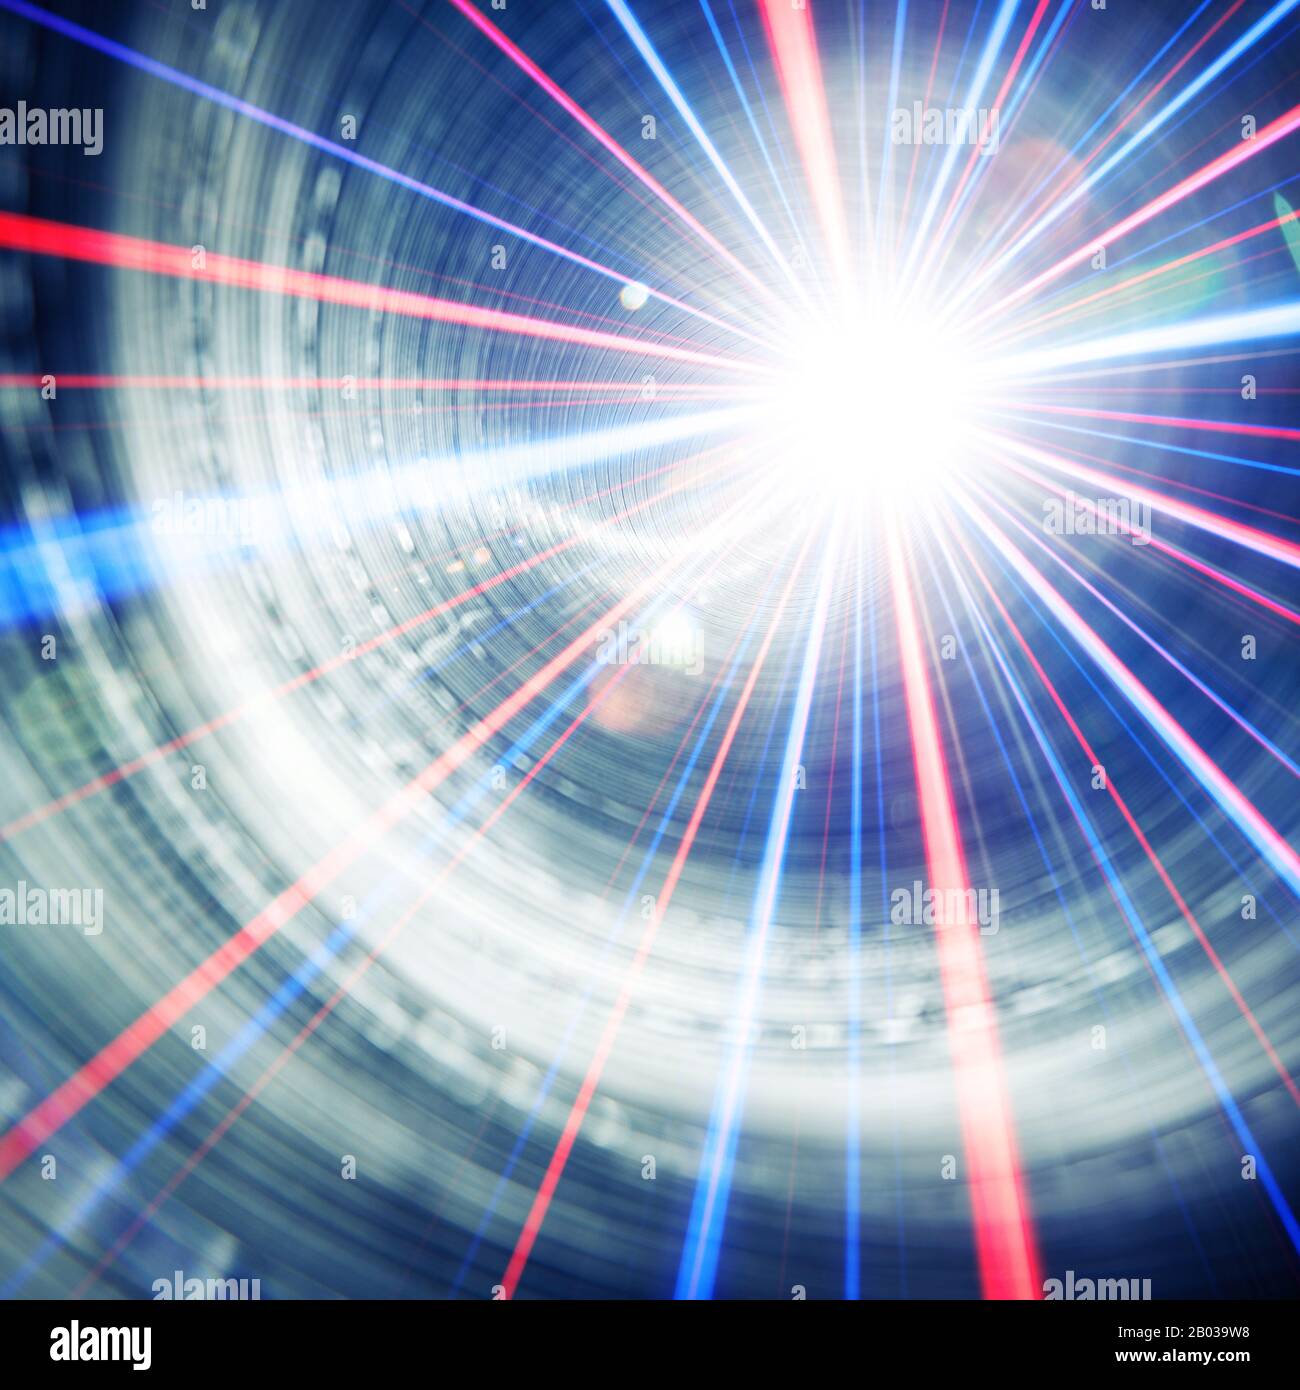 Abstract light beams, lasers, flares background Stock Photo